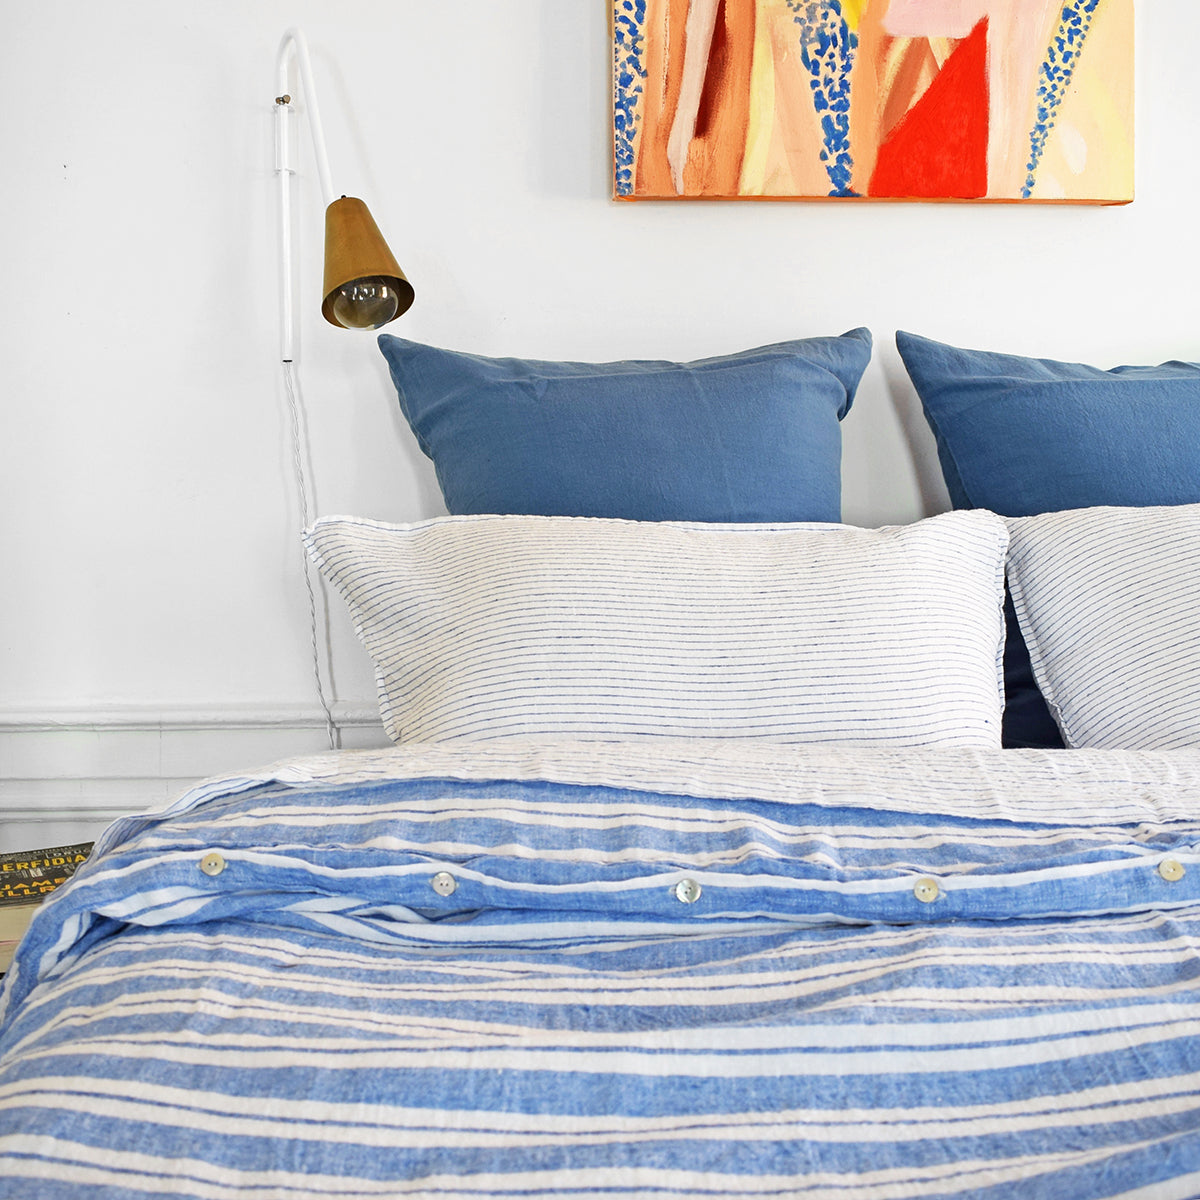 A Linge Particulier Linen Duvet in Large Blue Stripes gives a blue and white stripe color to this duvet for a colorful patterned and printed linen bedding look from Collyer&#39;s Mansion